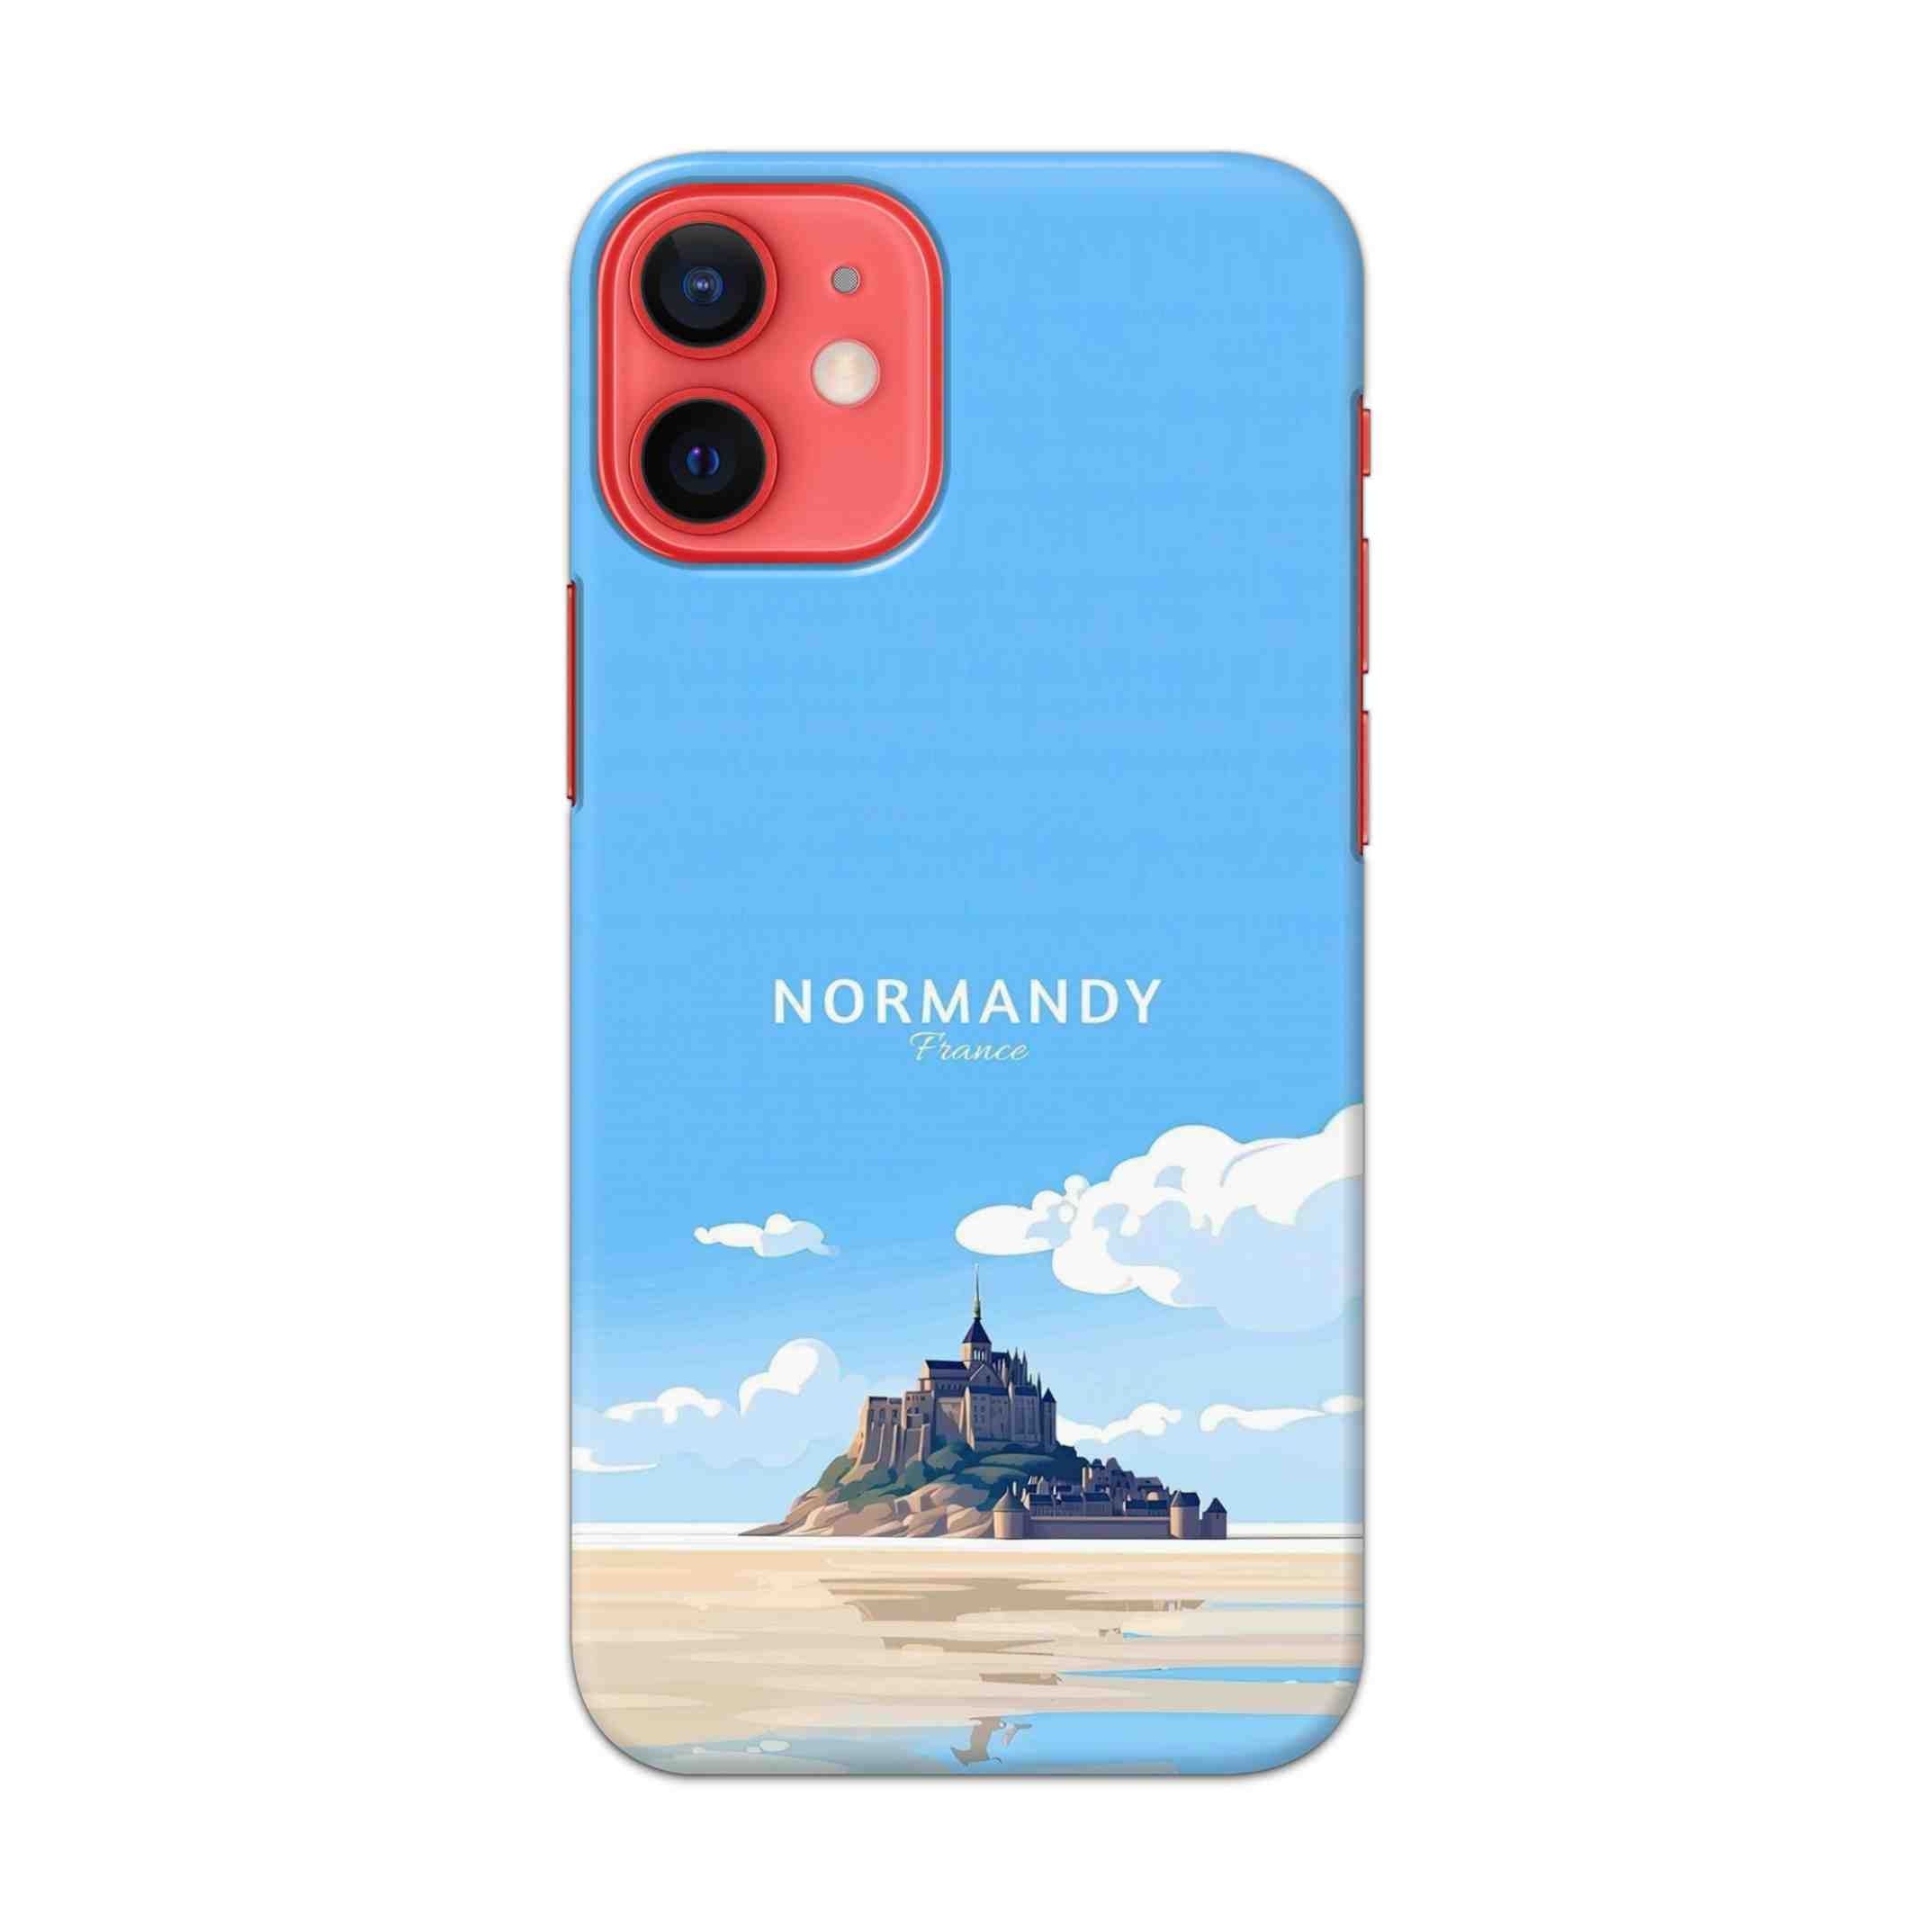 Buy Normandy Hard Back Mobile Phone Case/Cover For Apple iPhone 12 mini Online